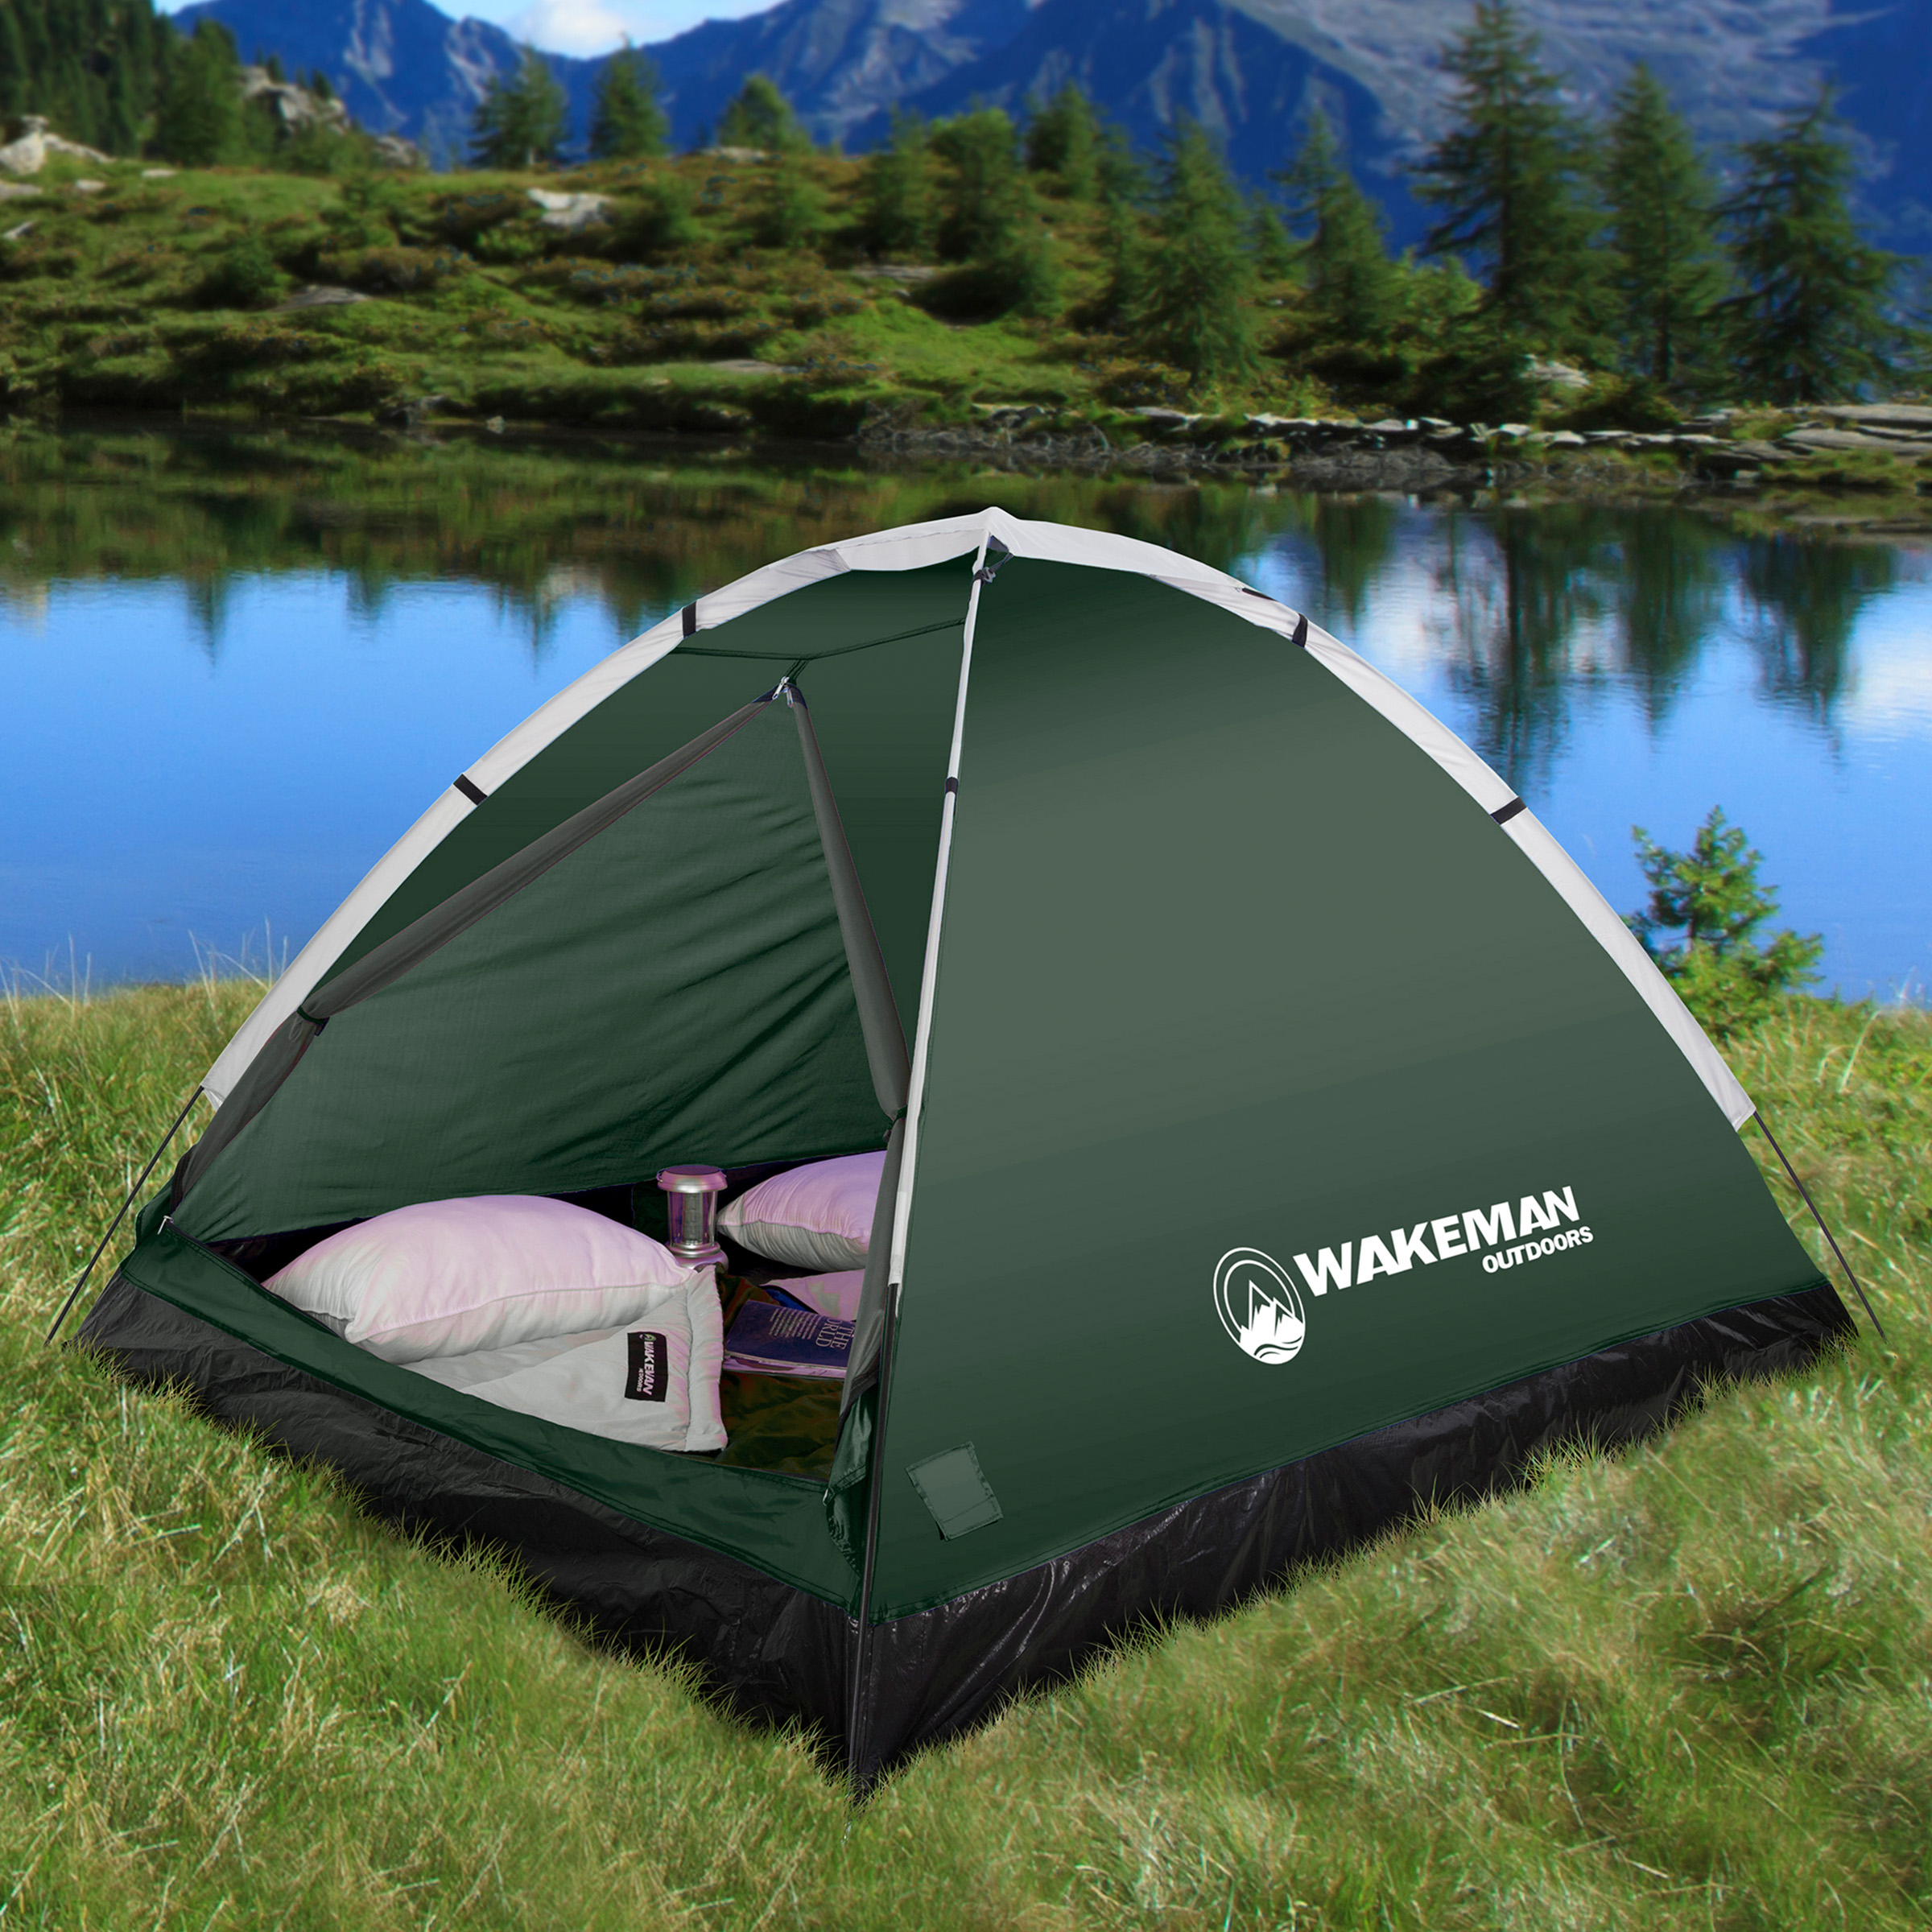 2-Person Dome Tent- Rain Fly & Carry Bag- Easy Set Up-Great for Camping, Backpacking, Hiking & Outdoor Music Festivals by Wakeman Outdoors - image 3 of 8